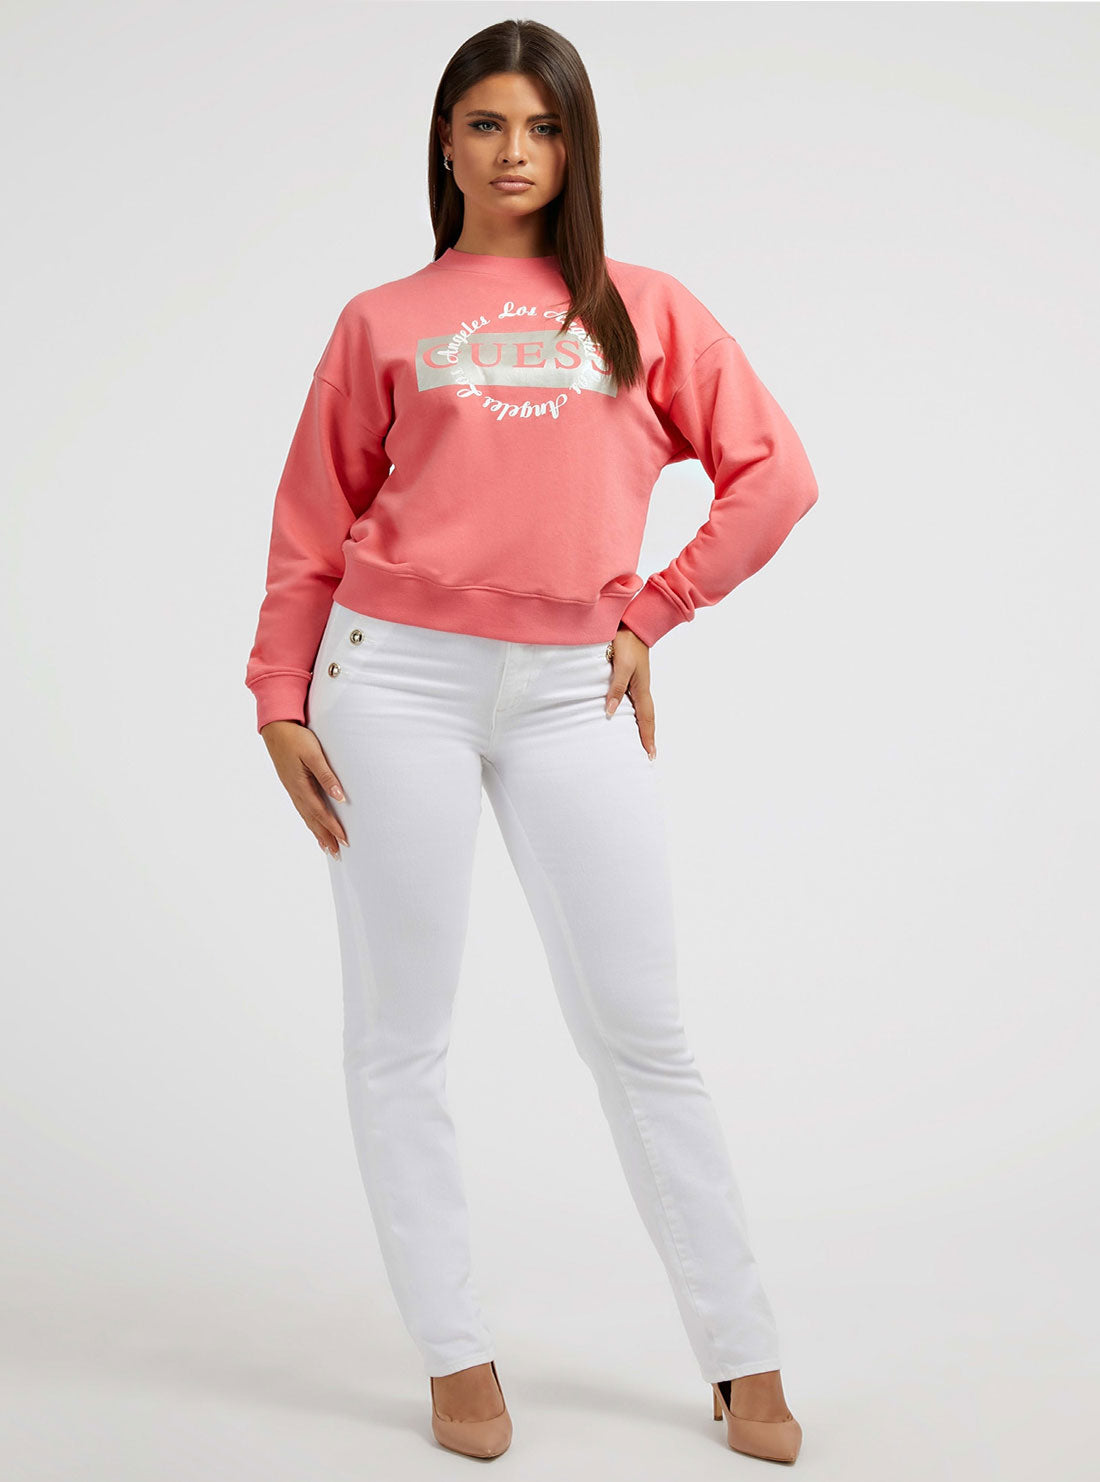 Pink Round Logo Jumper | GUESS Women's Apparel | full view